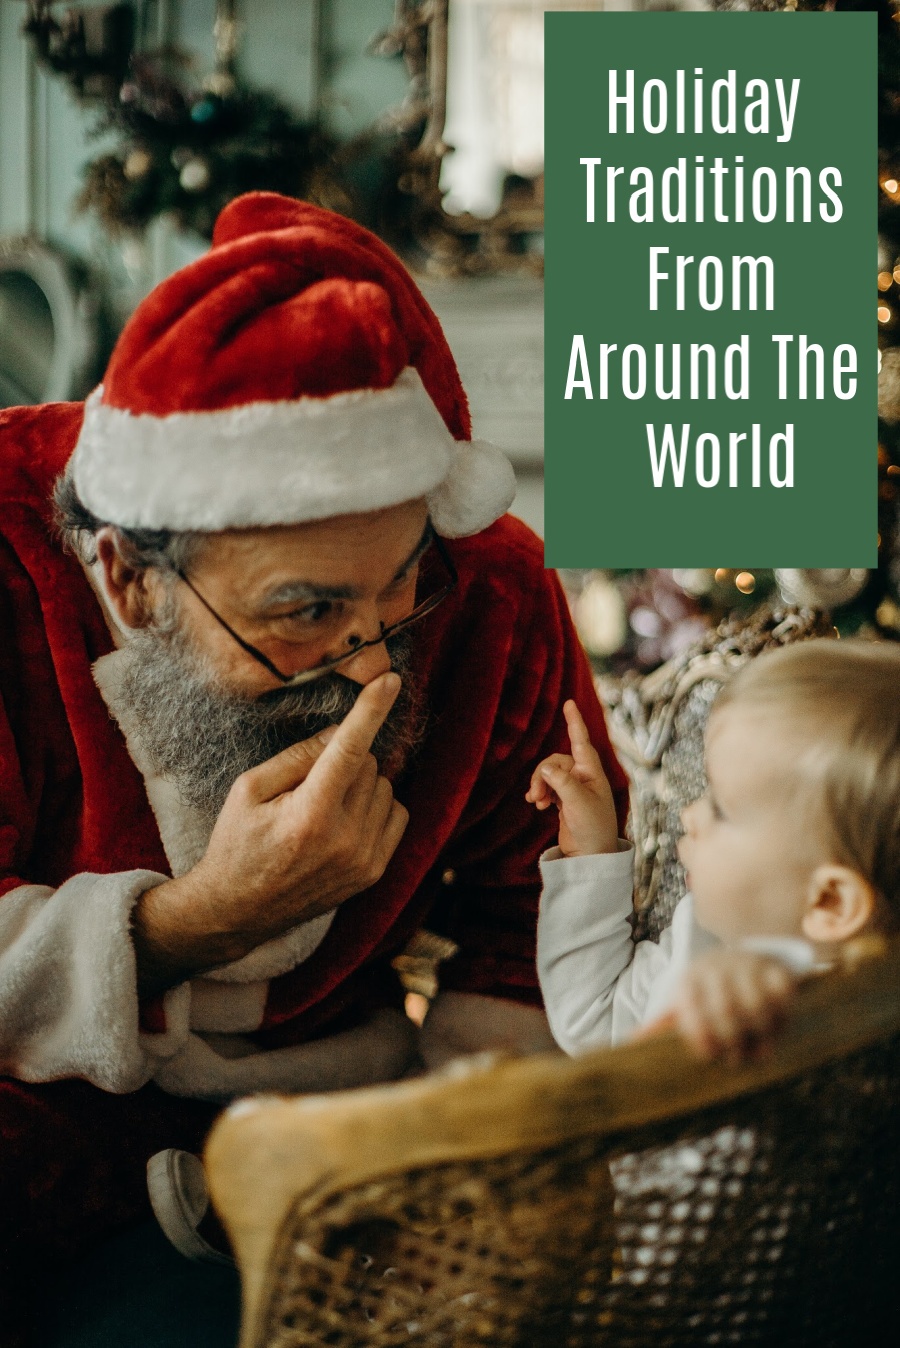 Holiday Traditions from Around the World